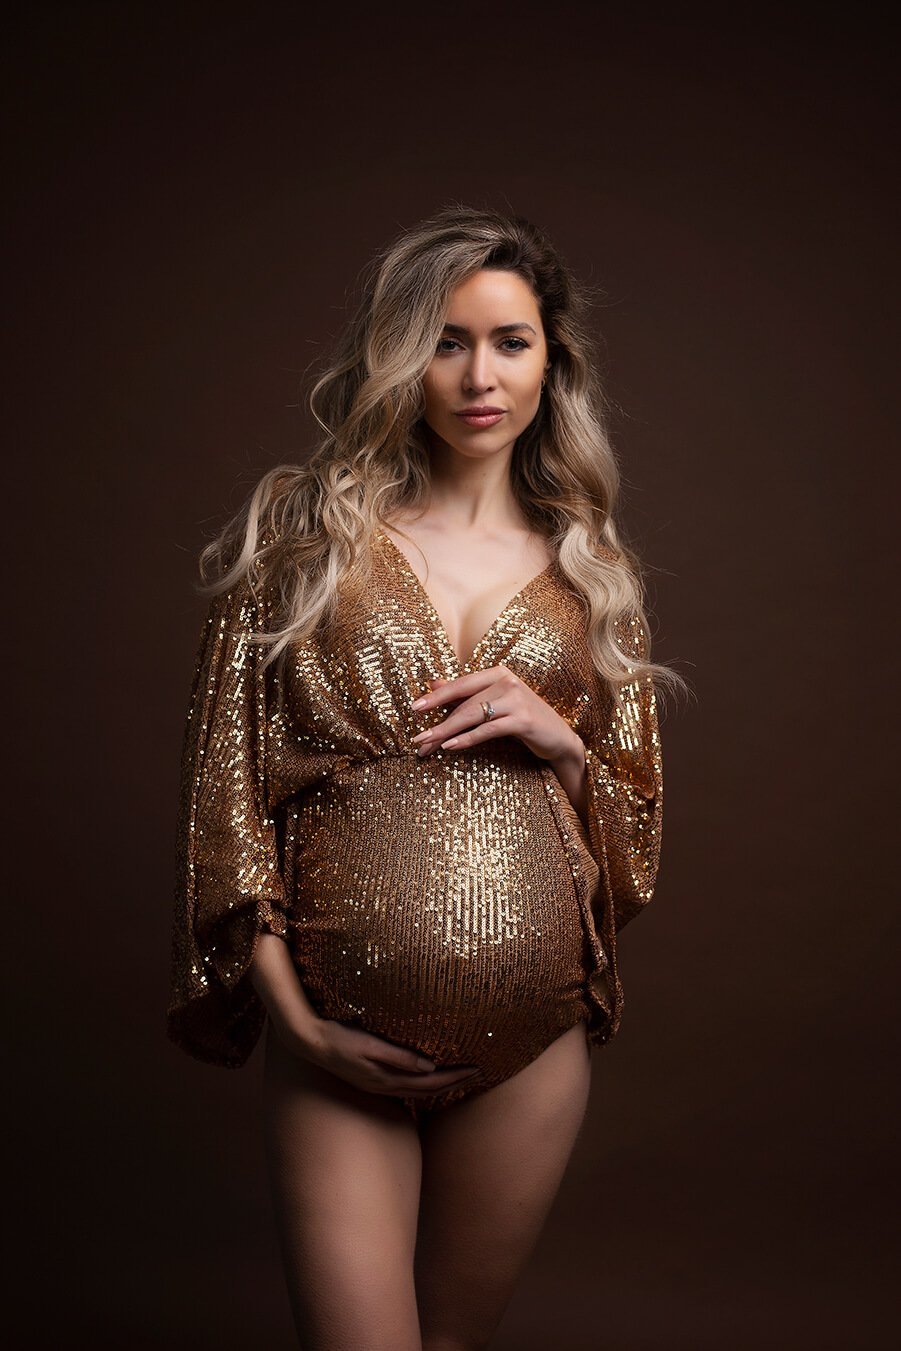 A maternity bodysuit in the color gold. She has long blonde hair. 